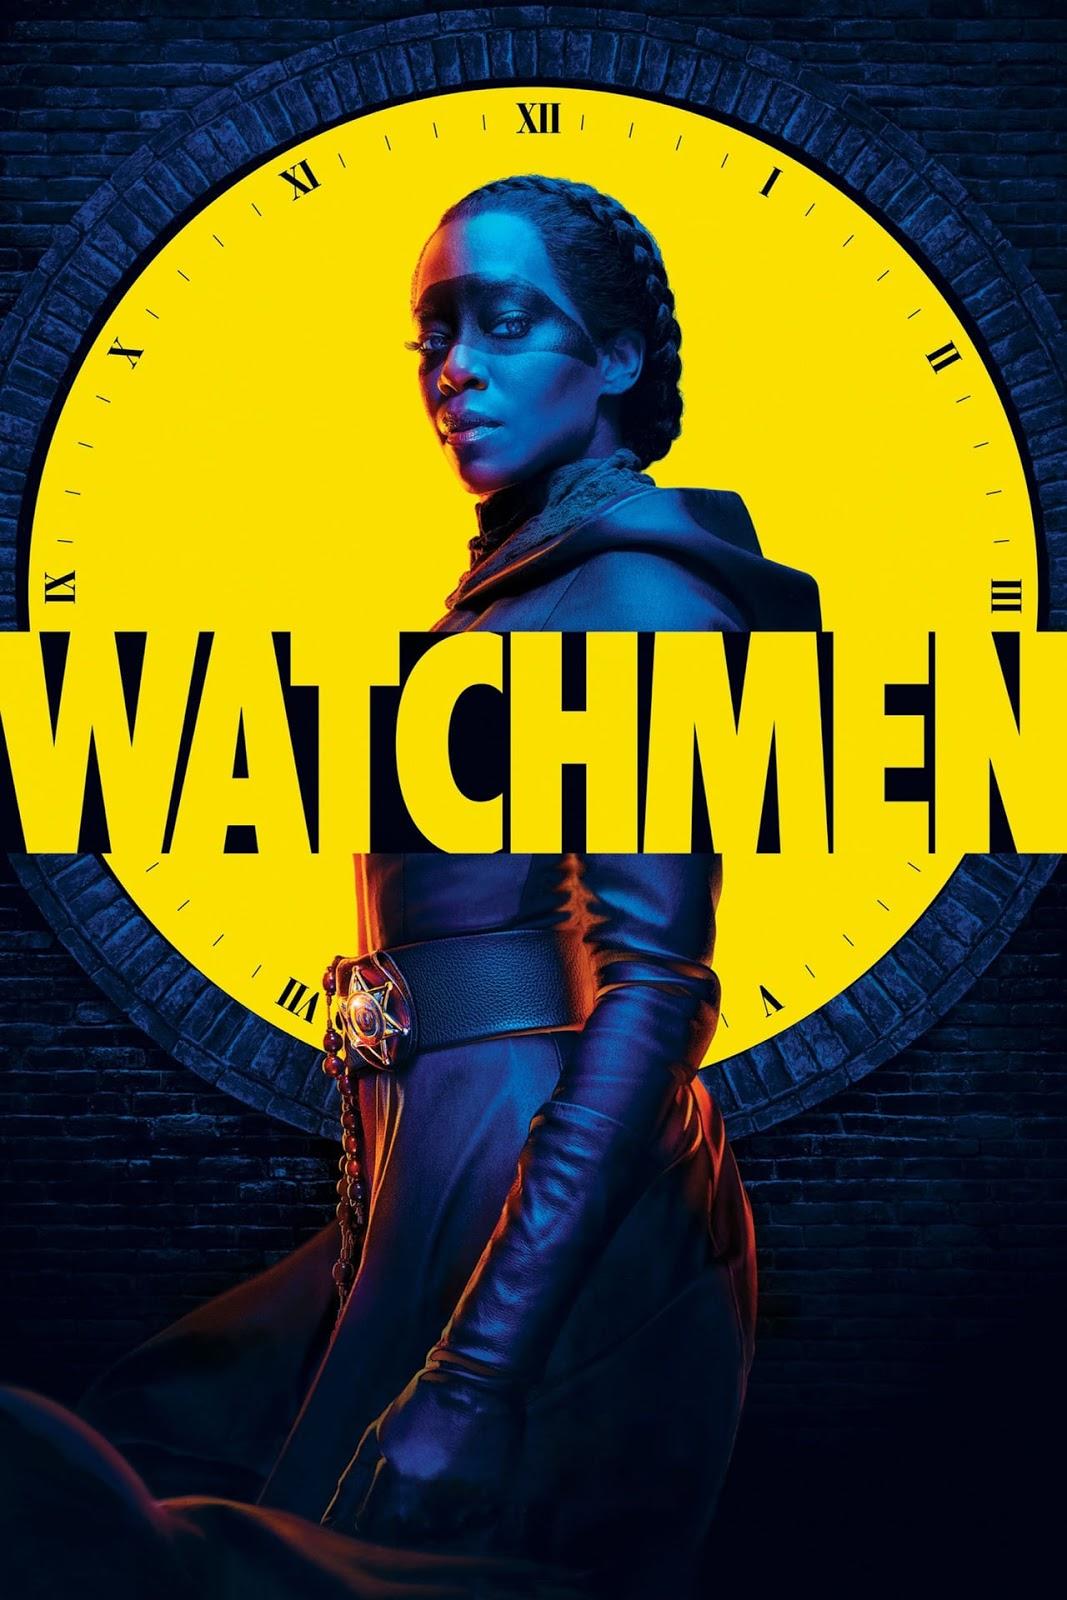 Poster for Watchmen; A Black woman superhero, lit in blue and red, stands in front of a large yellow clock